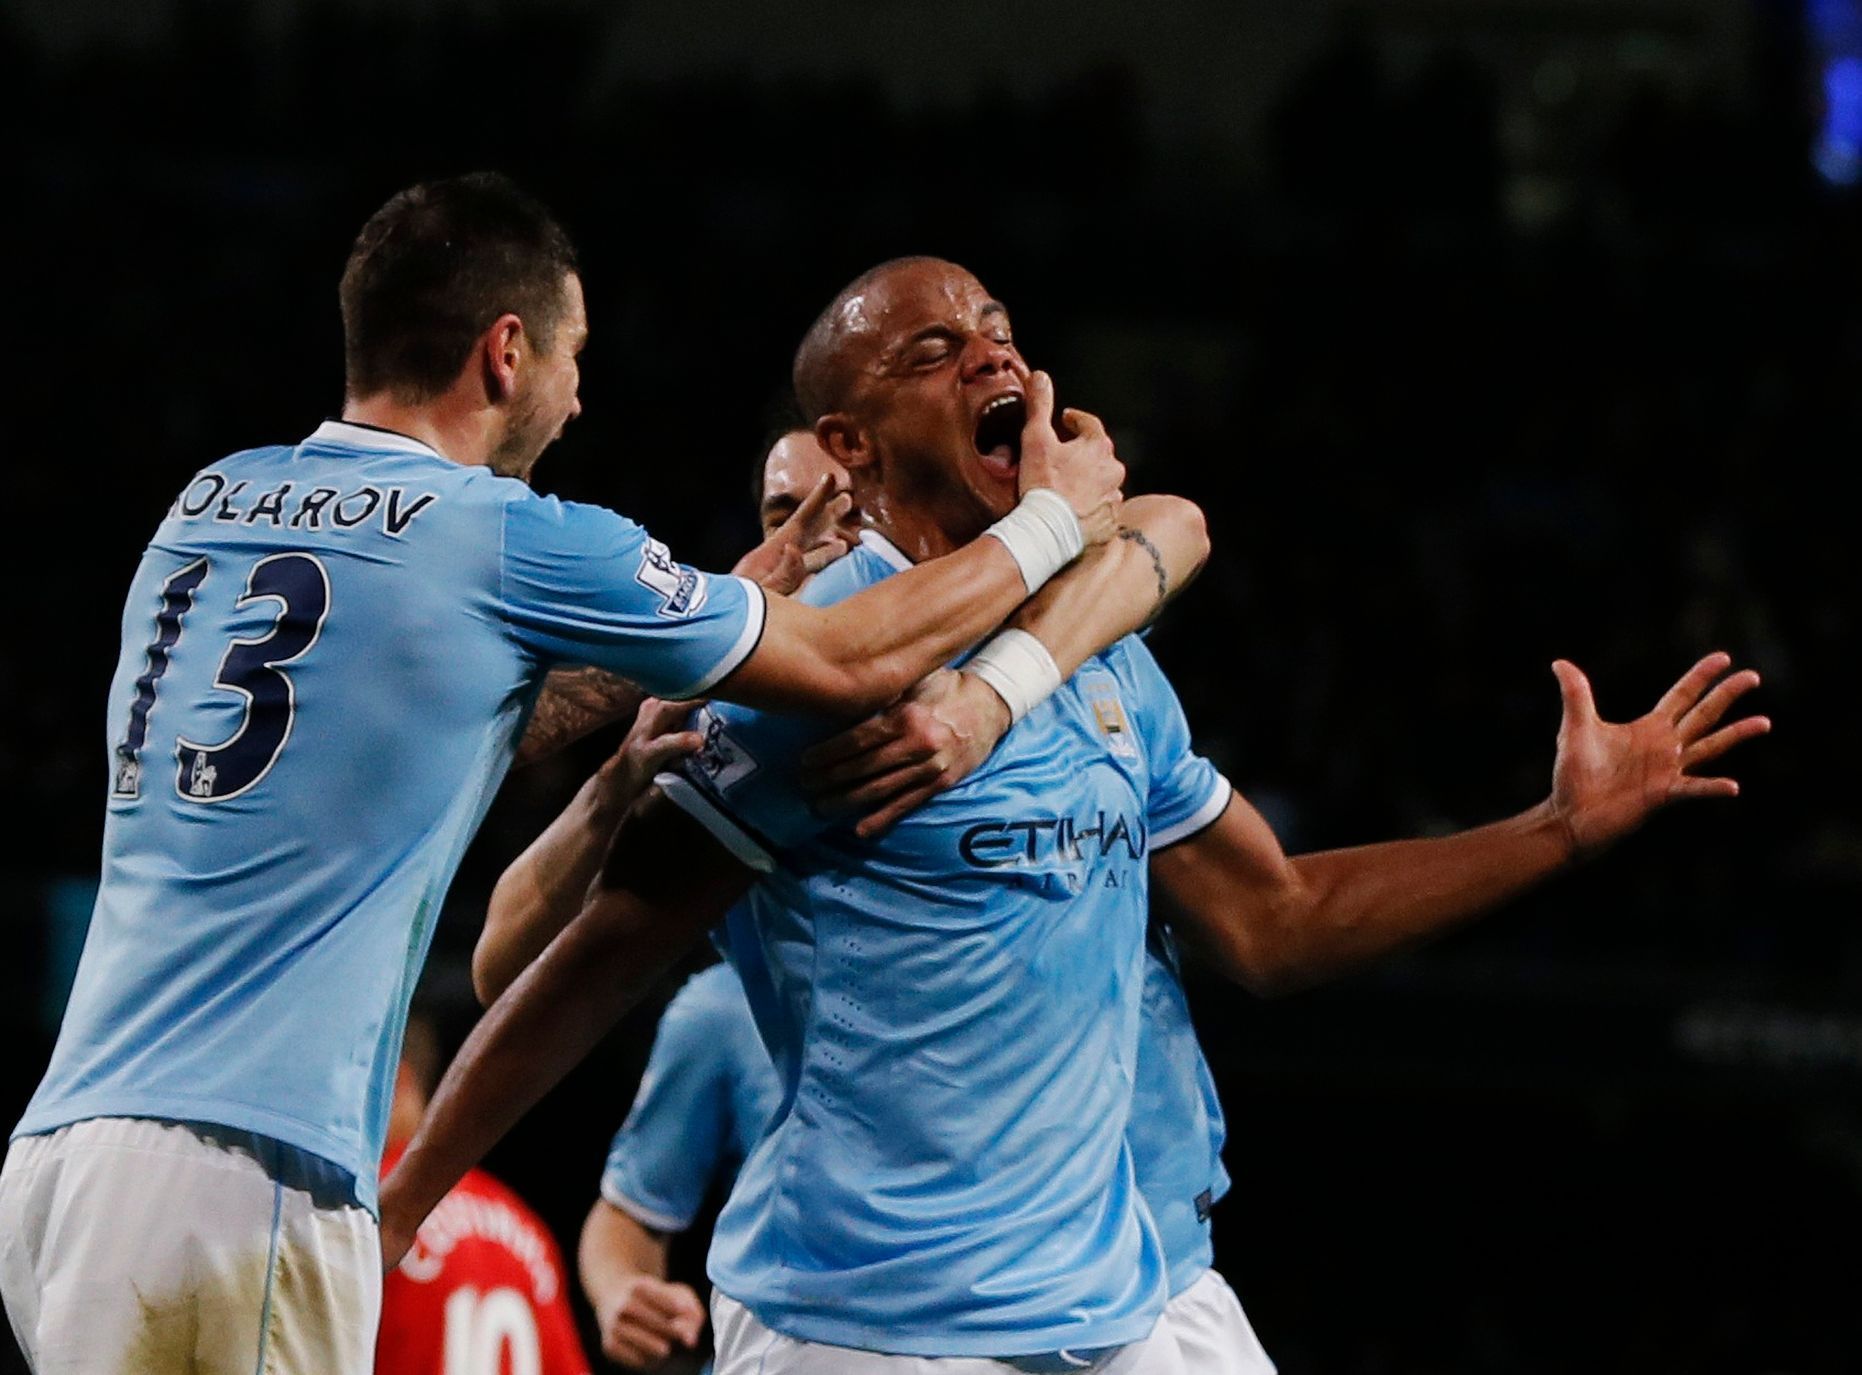 Manchester City's Kompany celebrates with teammates after scoring a goal against Liverpool during their English Premier League soccer match in Manchester